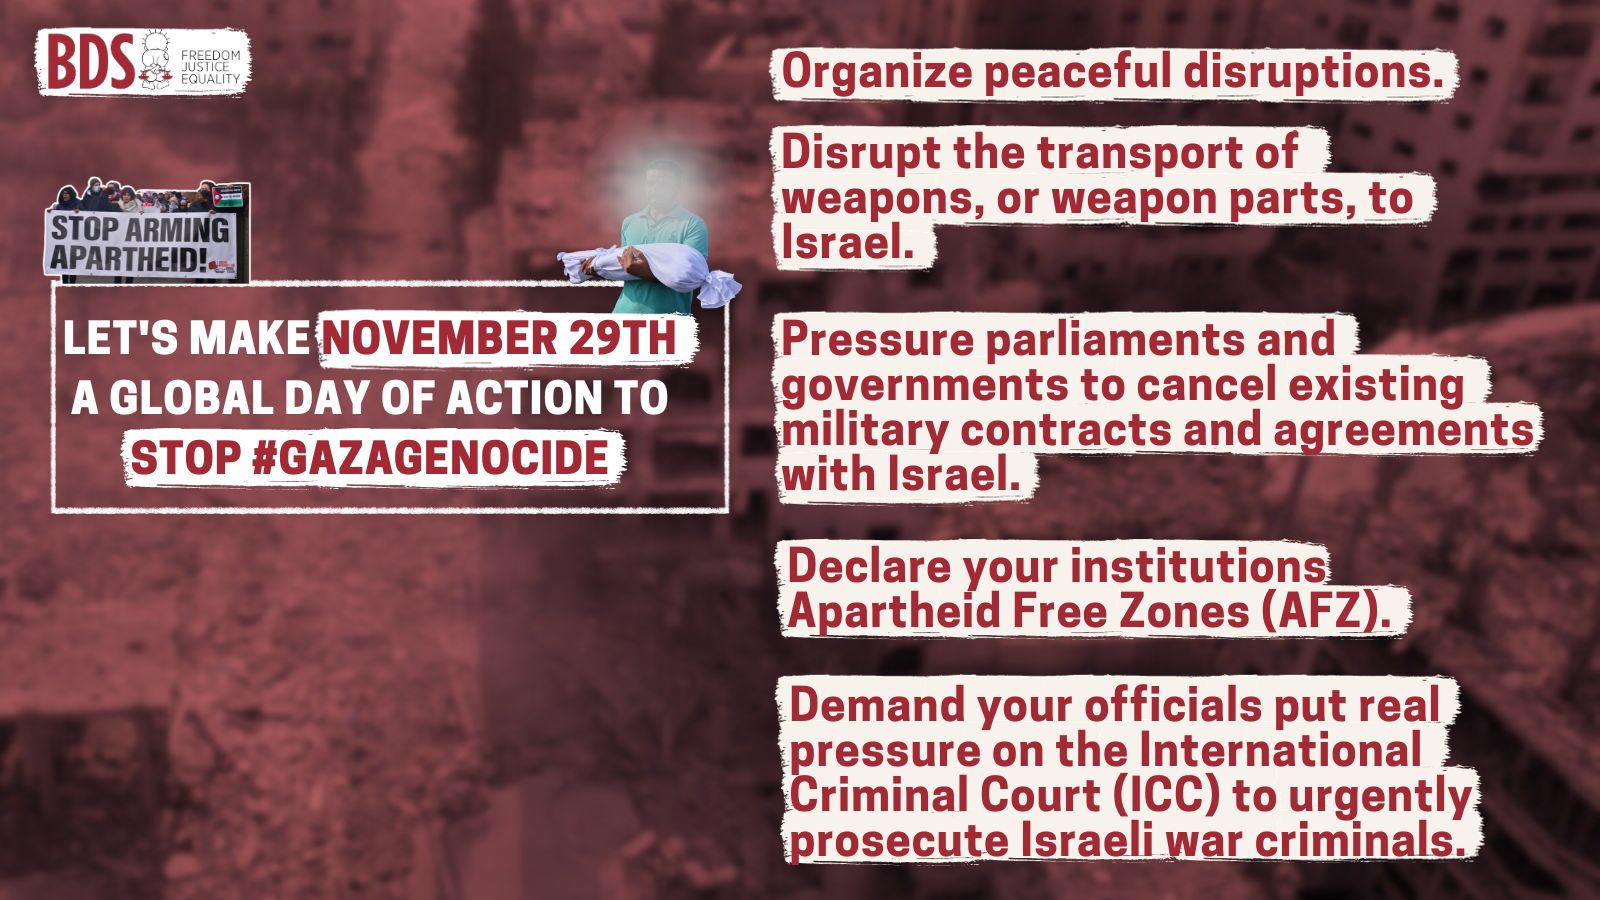 Unite now to stop #GazaGenocide and start dismantling ...